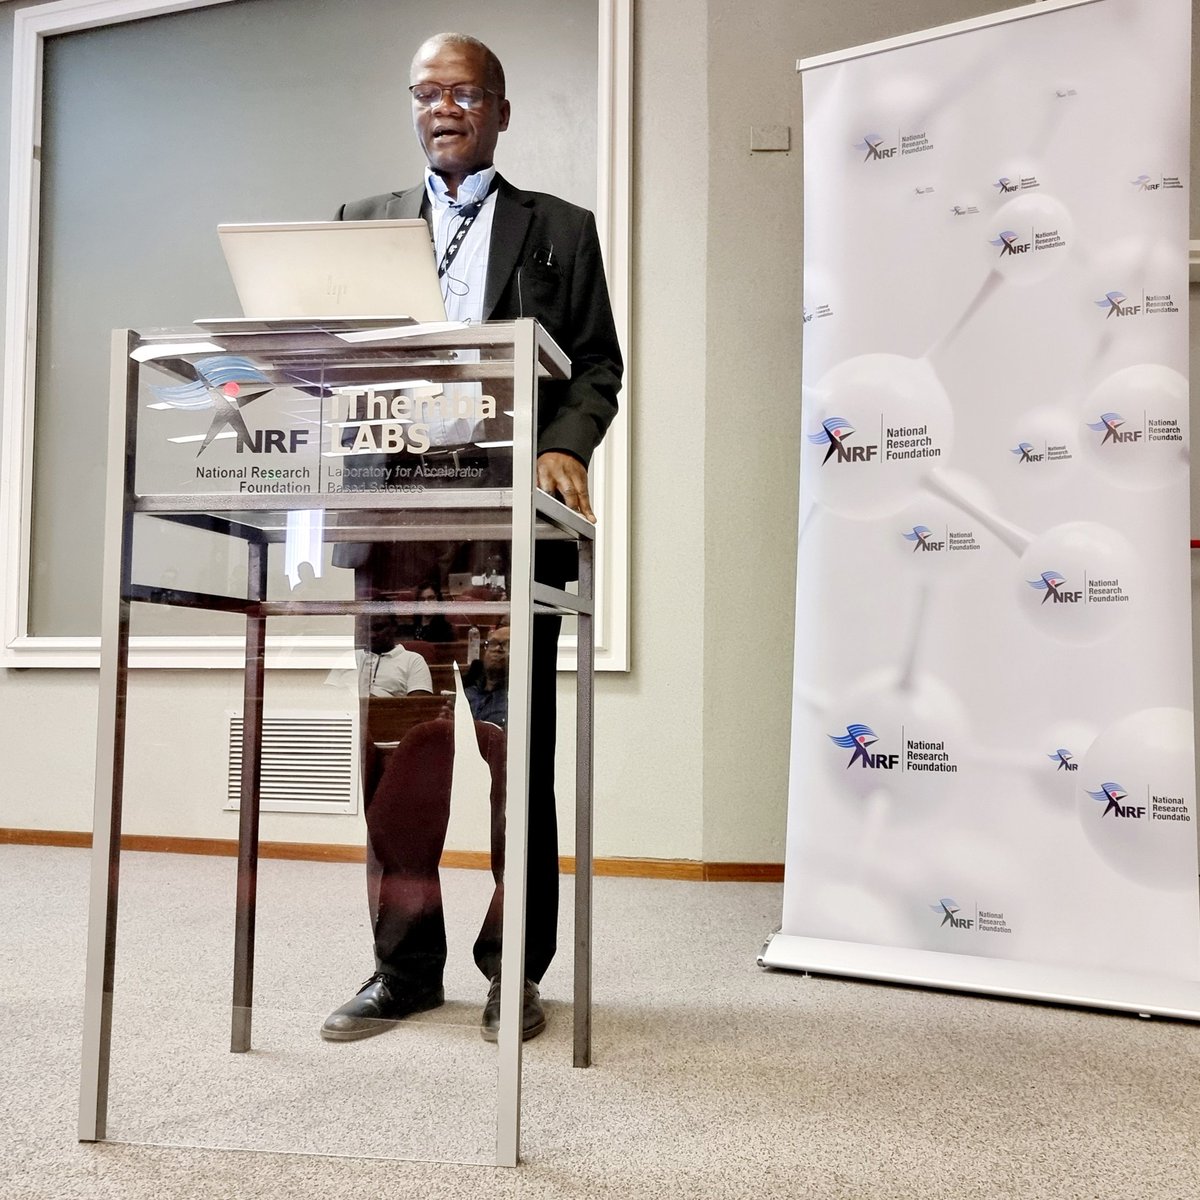 Prof Victor Tshivhase, MD of NRF-iThemba LABS, opens the 5th Advanced Nuclear Science and Technology Techniques workshop in Cape Town. Another example of the NRF's committed to advance research, training, and expertise through partnerships.#NRF25years @NRF_News @dsigovza